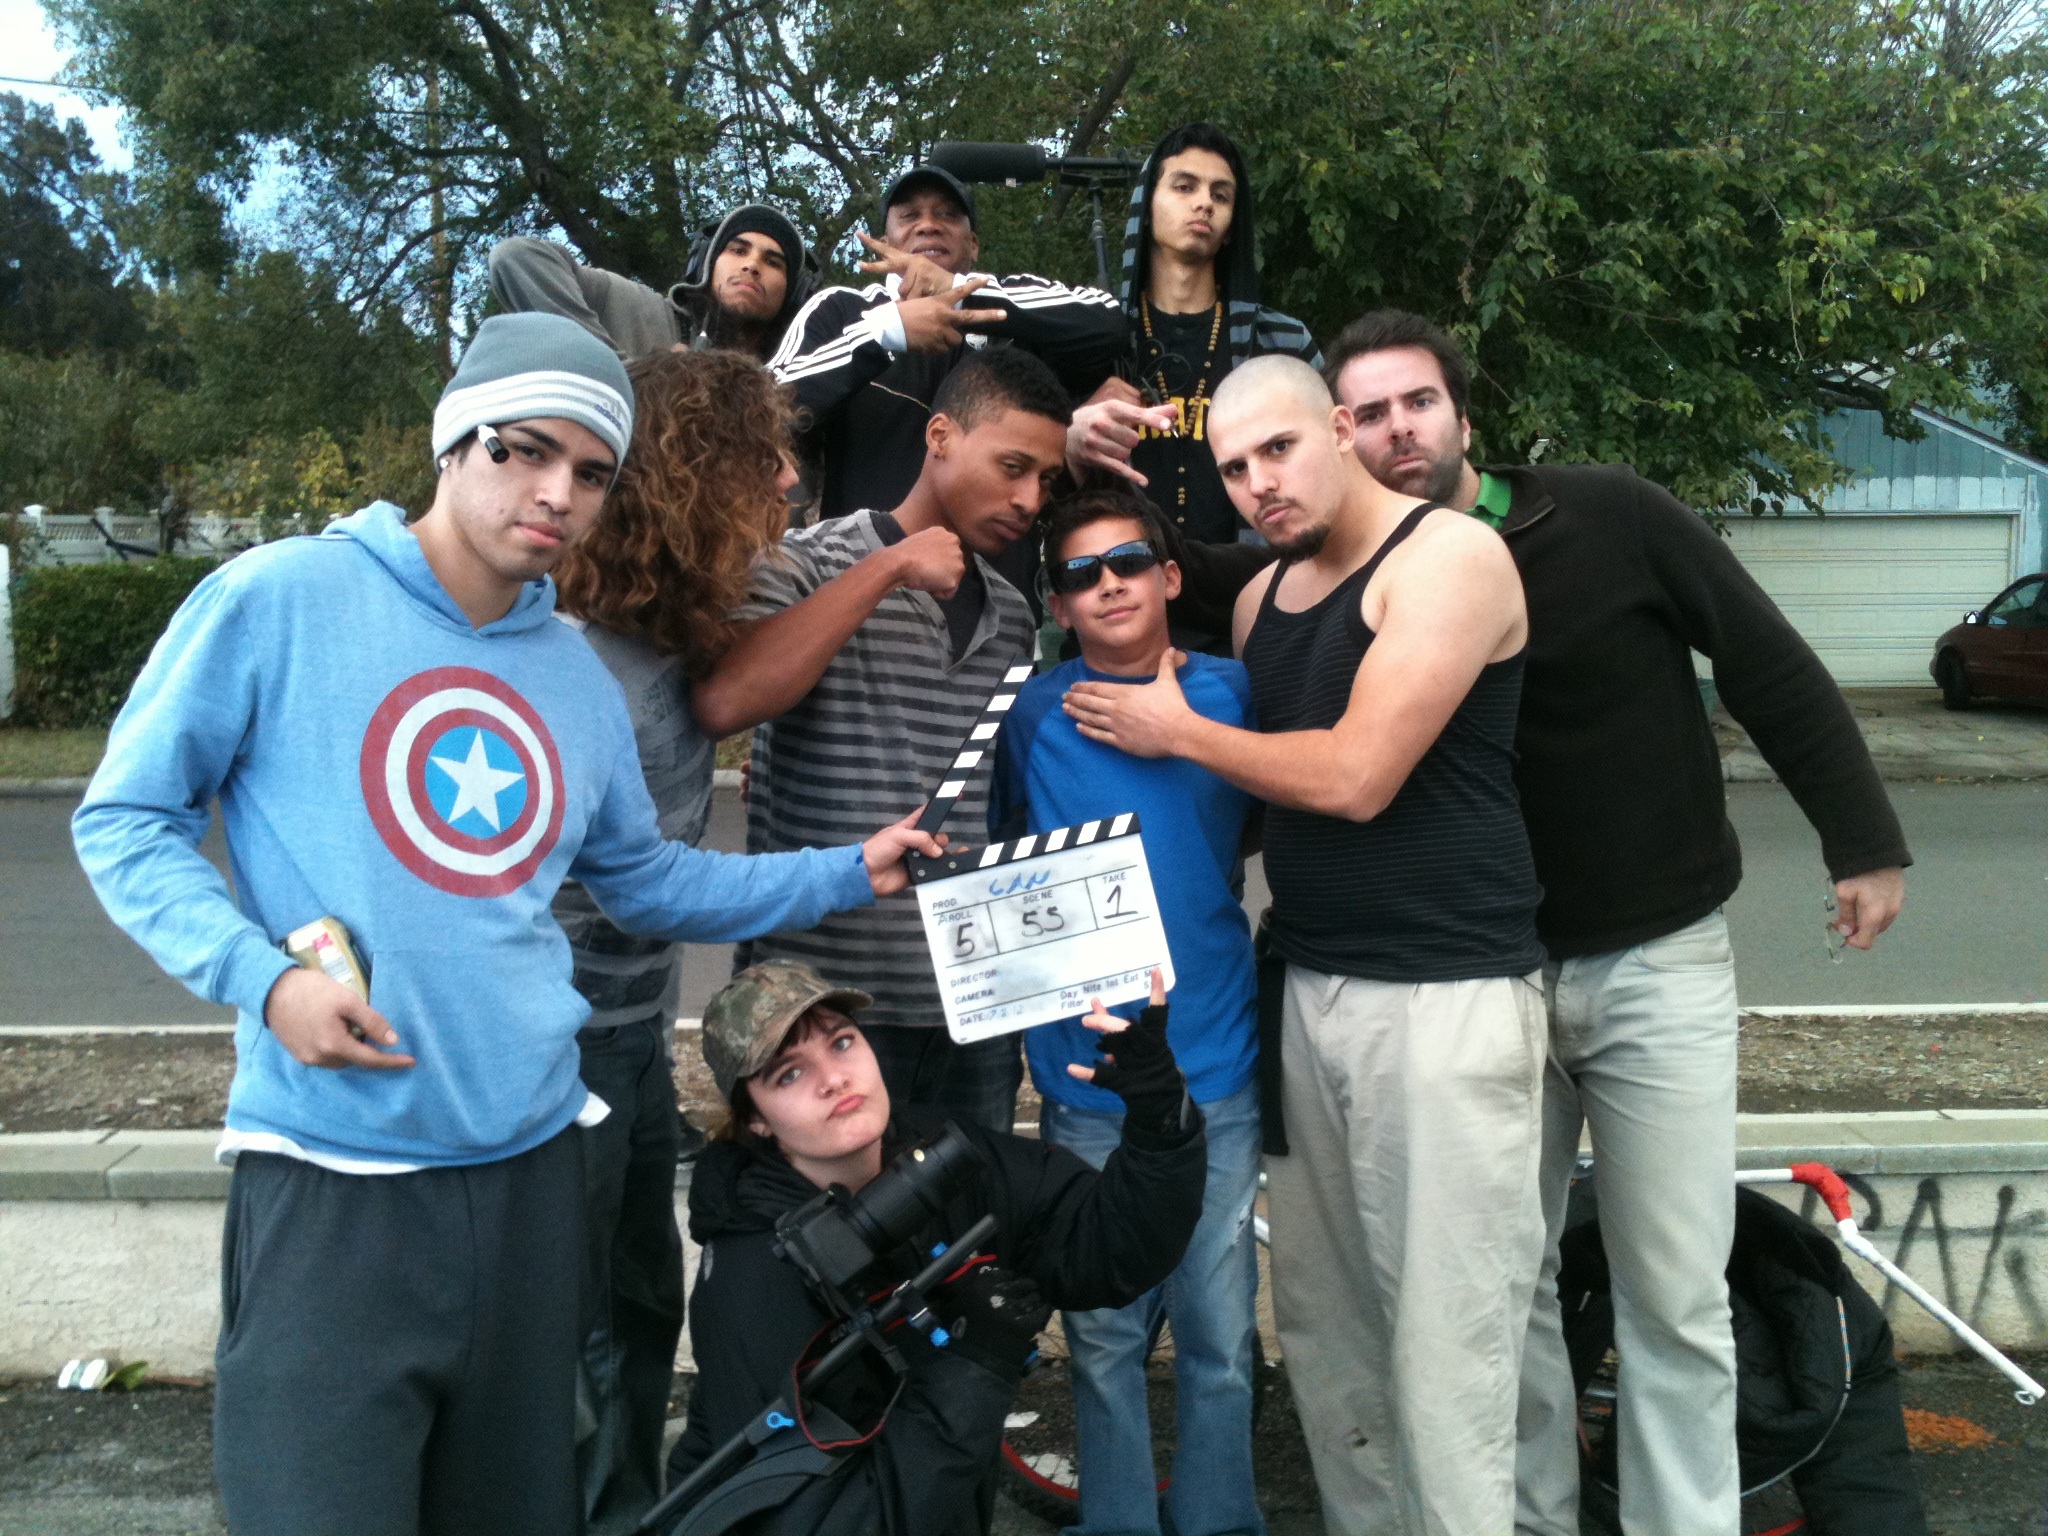 On set of CAN (the movie)